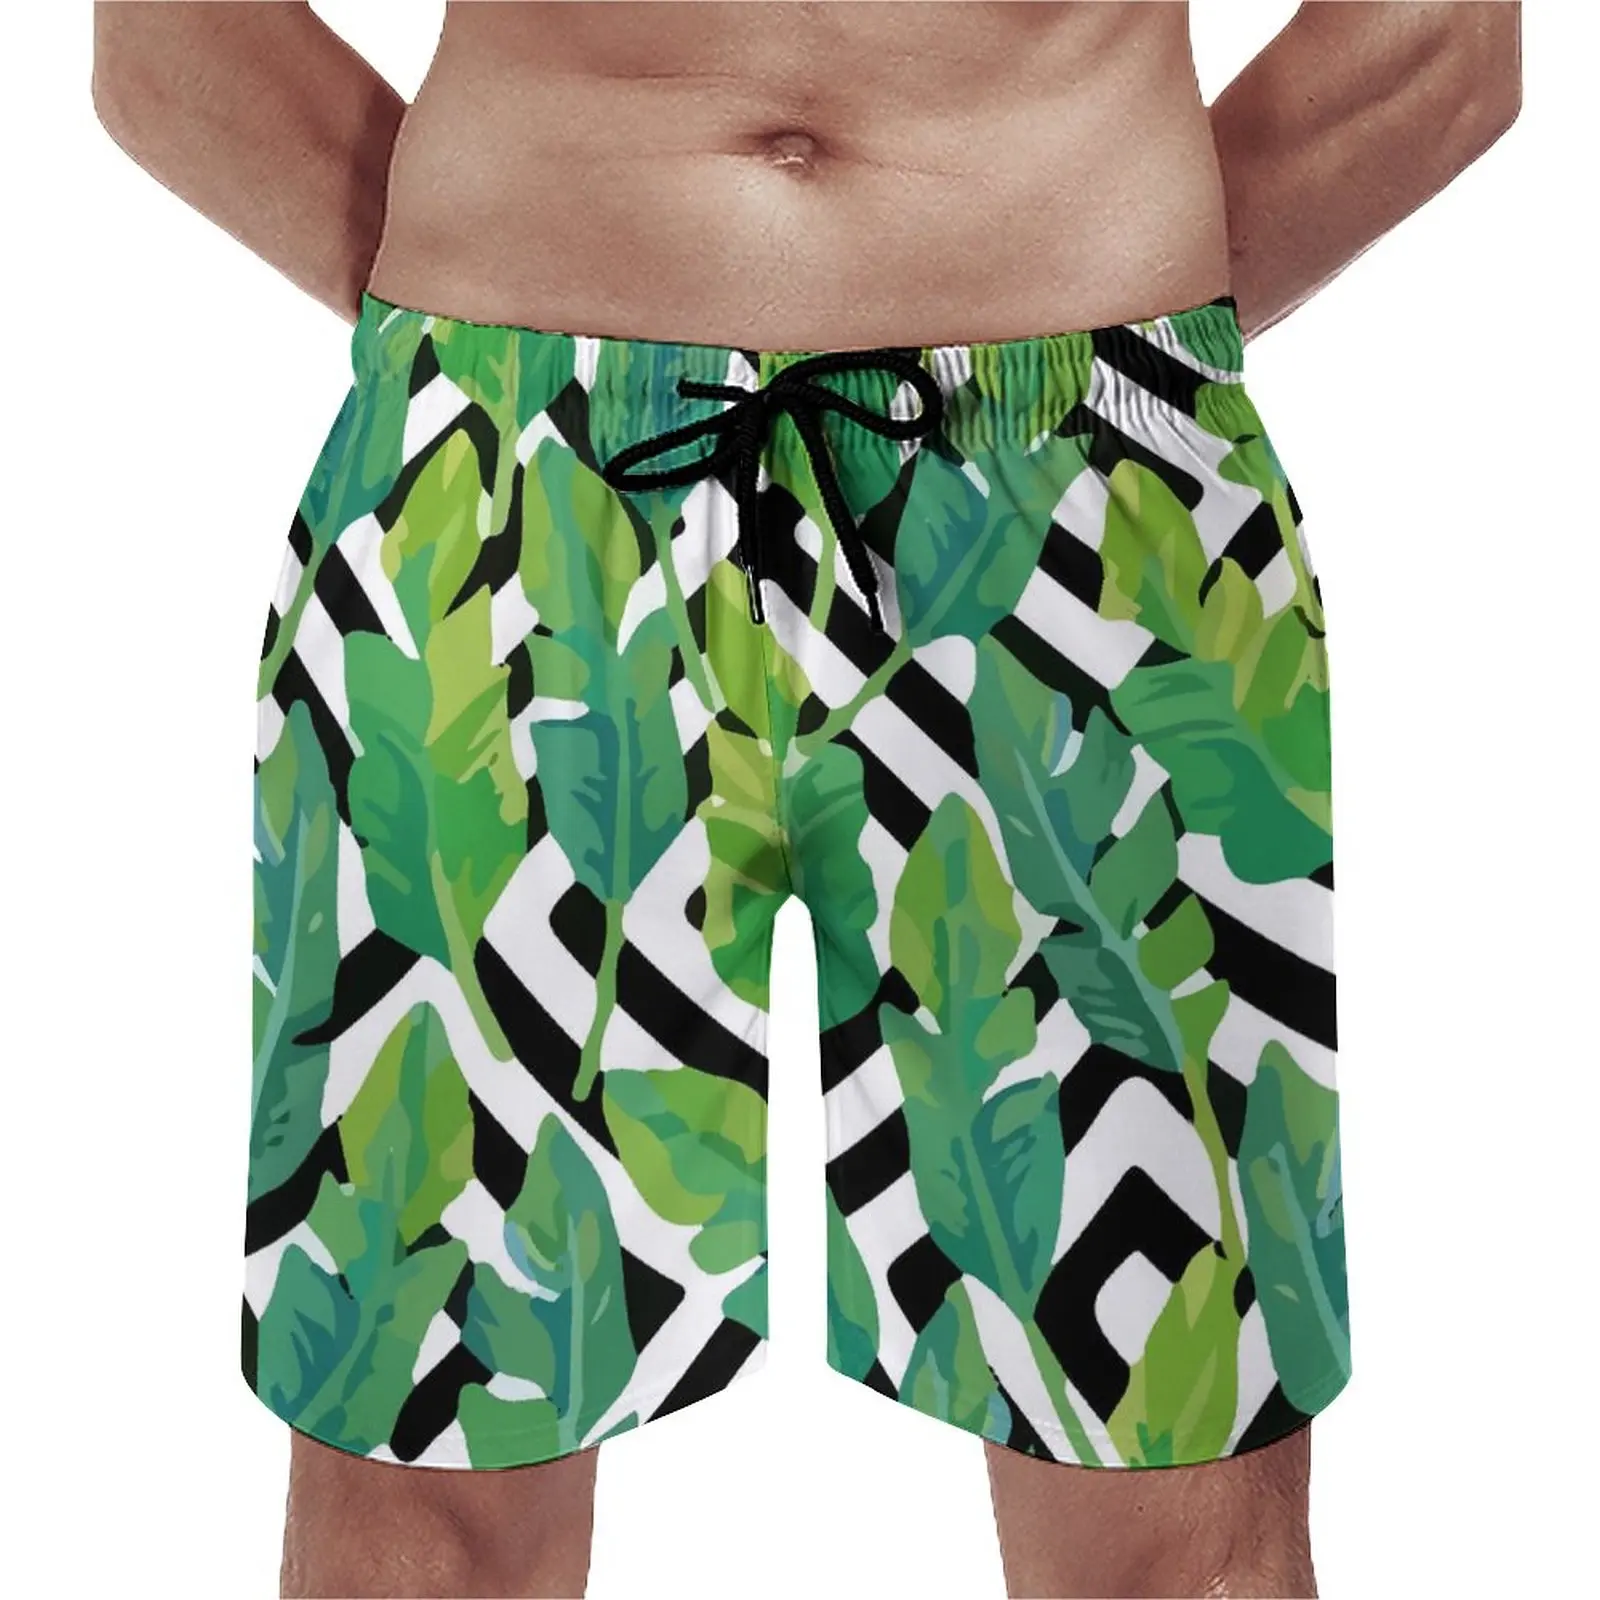 

Tropical Palm Board Shorts Summer Green Leaves Print Running Surf Board Short Pants Fast Dry Funny Graphic Plus Size Swim Trunks